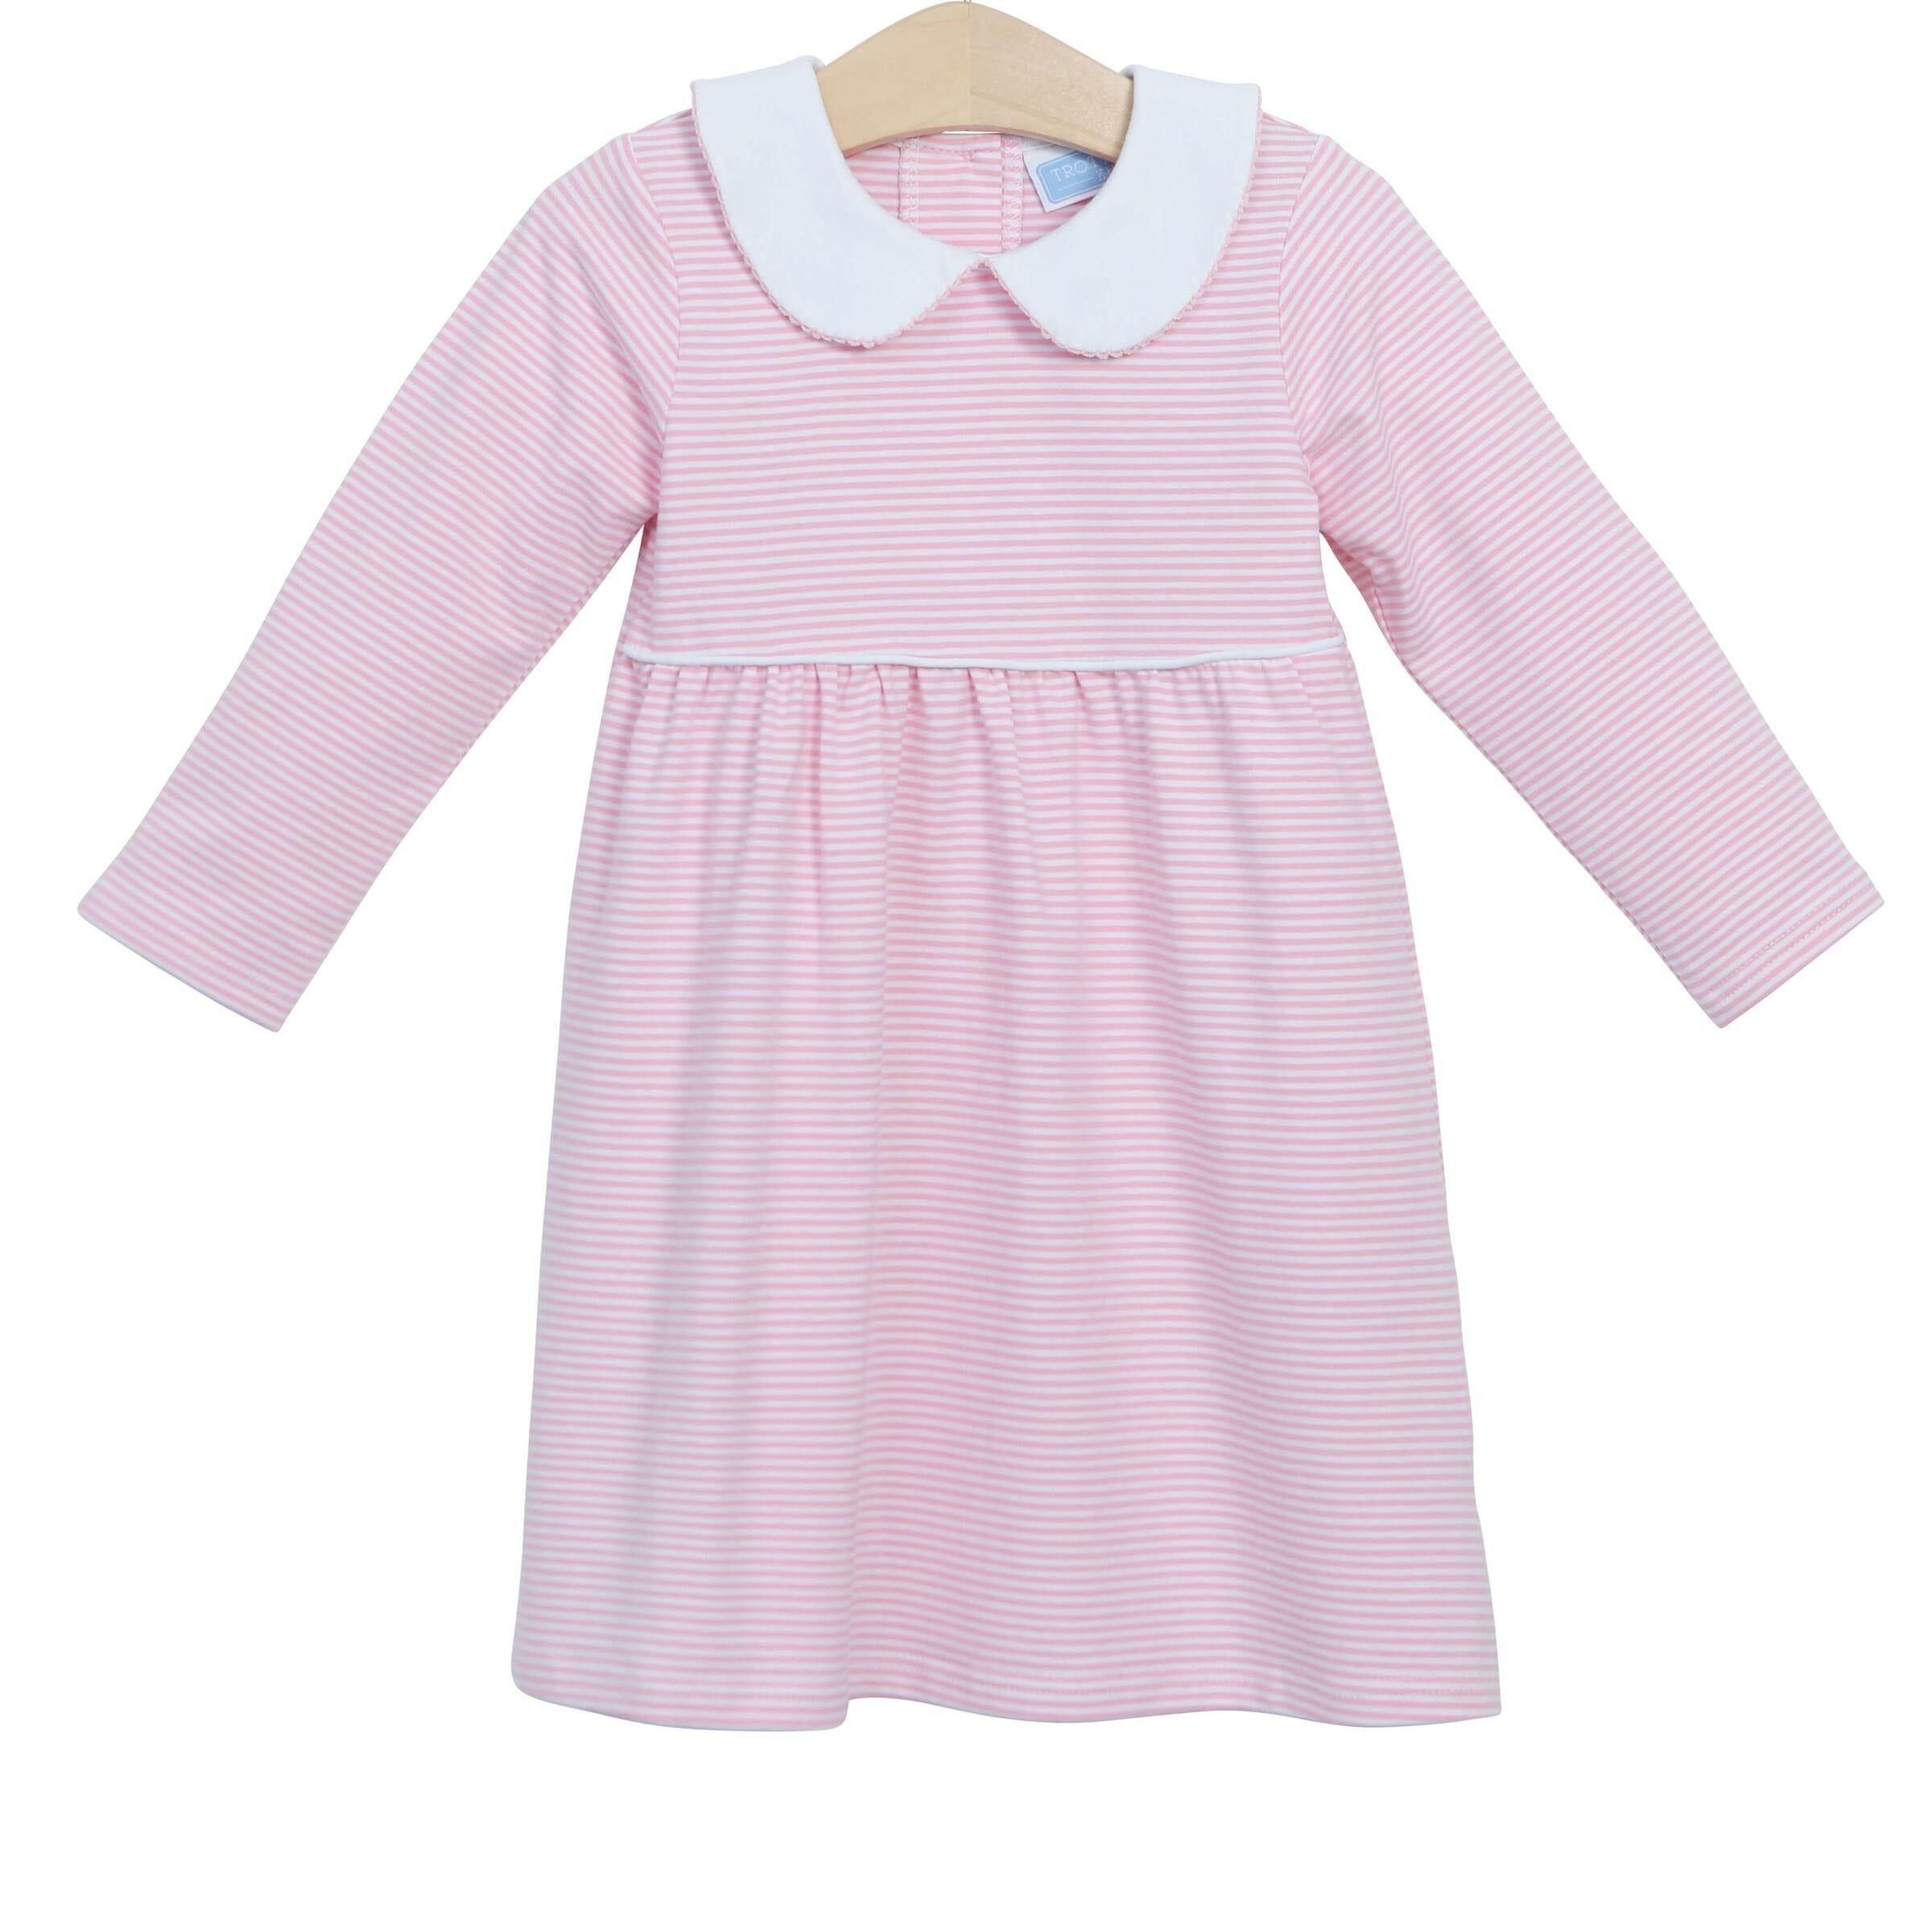 CLAIRE LONG SLEEVE DRESS IN LIGHT PINK STRIPE